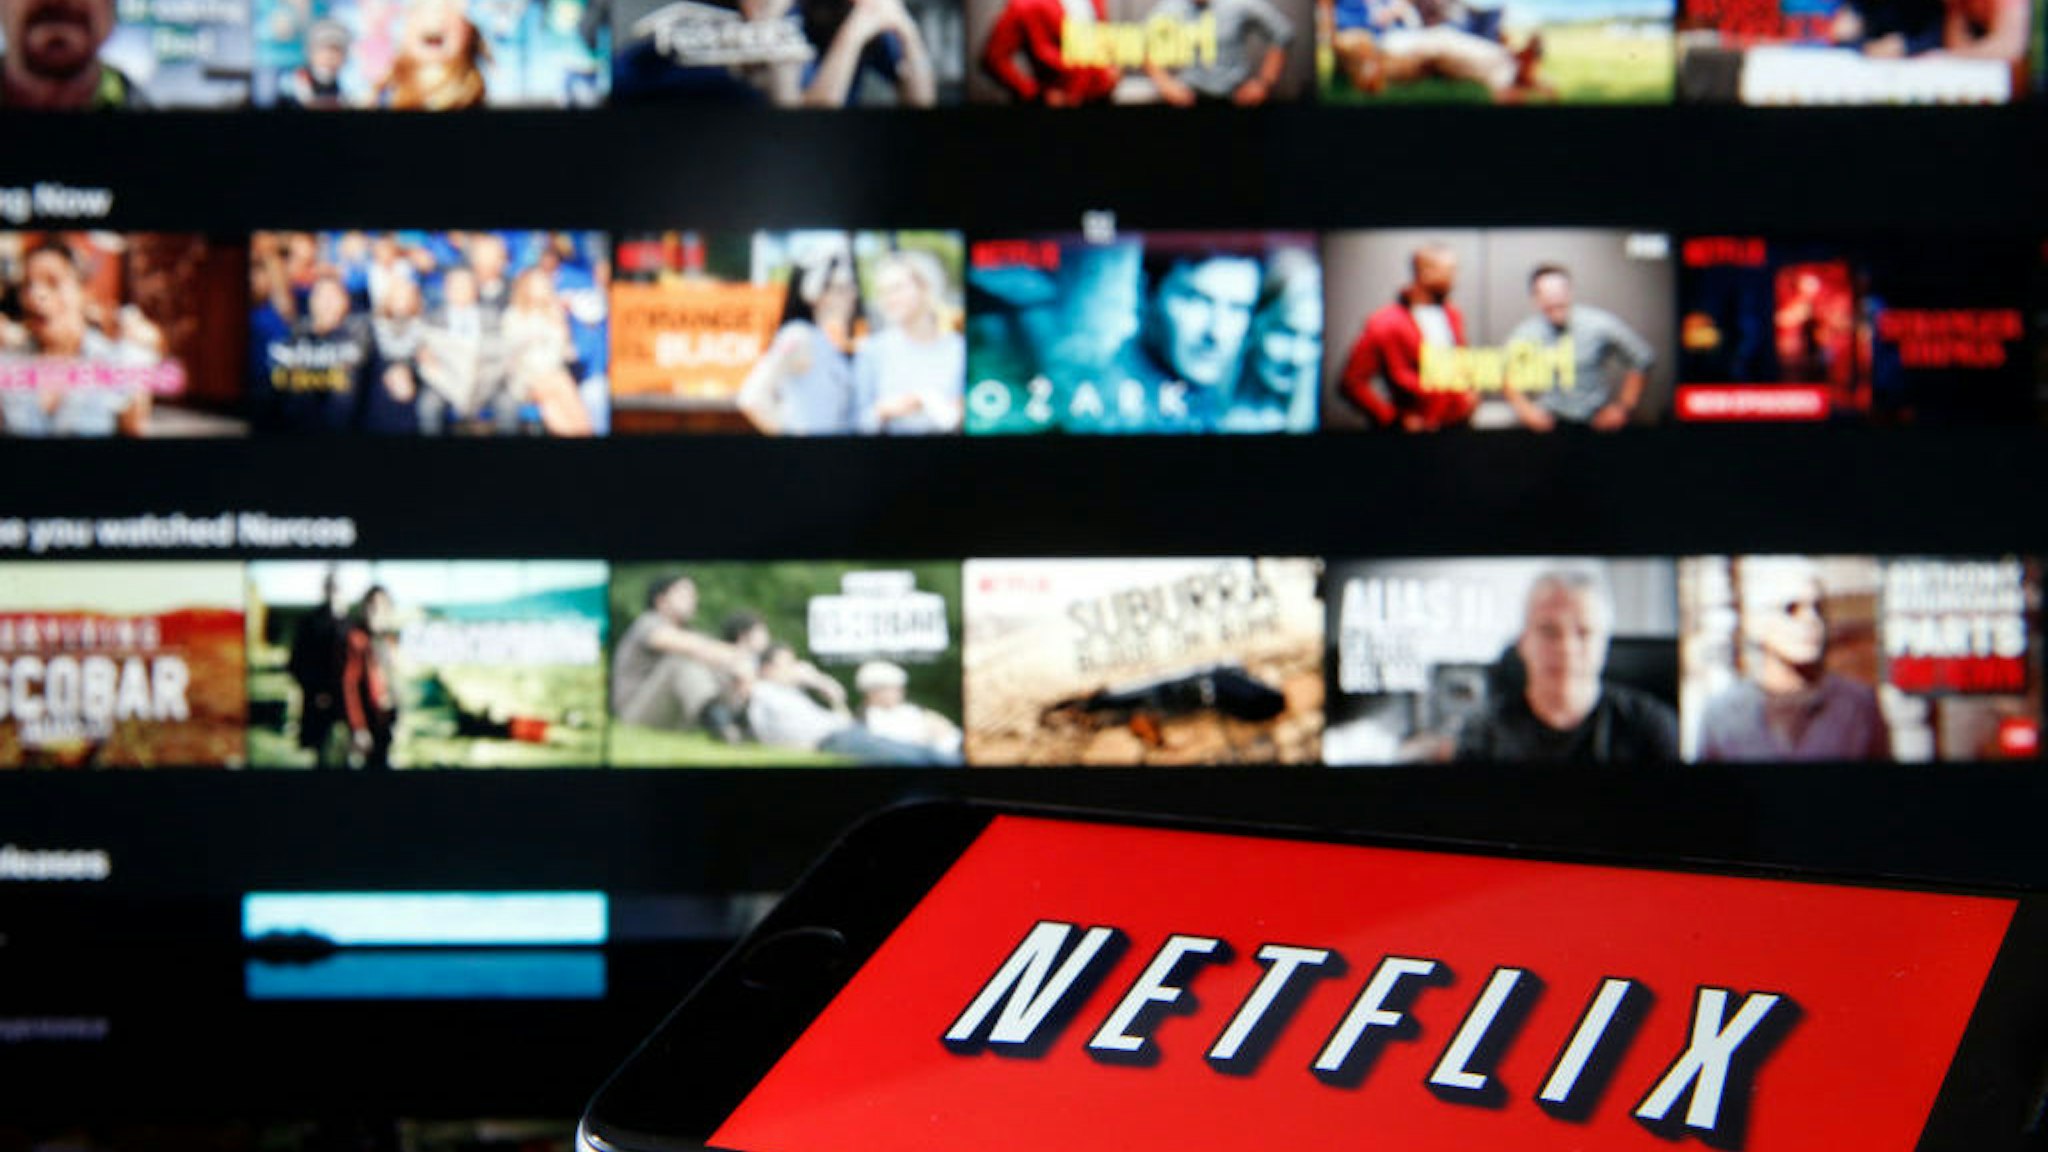 In this photo illustration, the Netflix media service provider's logo is displayed on the screen of an iPhone in front of a television screen on March 28, 2020 in Paris, France. Faced with the coronavirus crisis, Netflix will reduce visual quality for the next 30 days, in order to limit its use of bandwidth. (Photo Illustration by Chesnot/Getty Images)